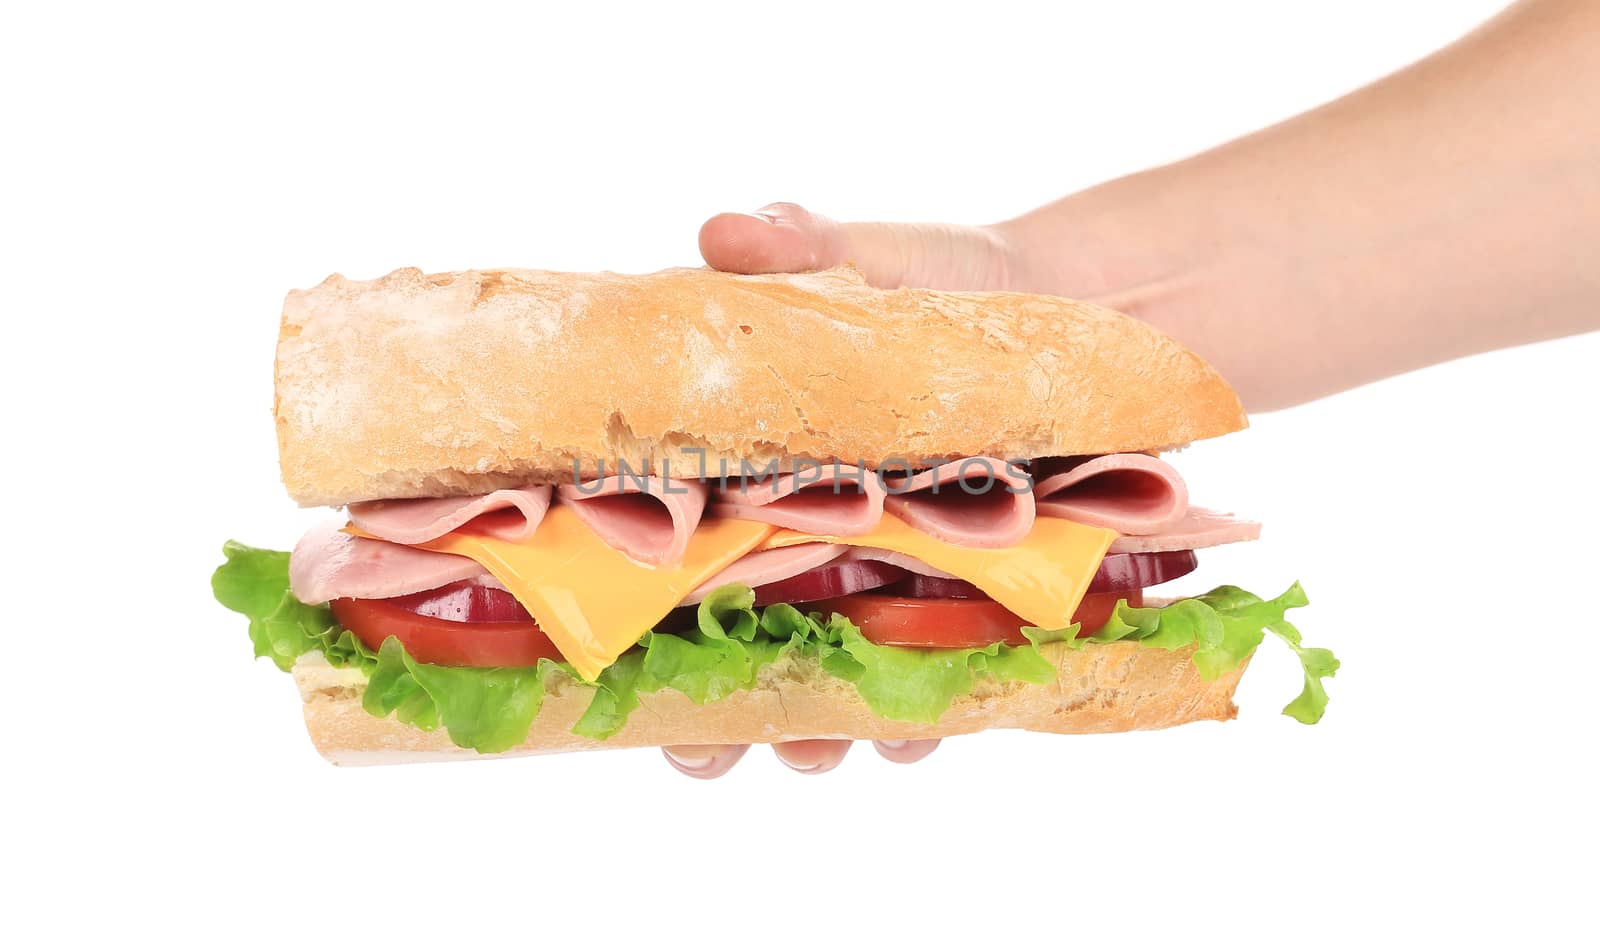 Big fresh sandwich in hand. Isolated on a white background.